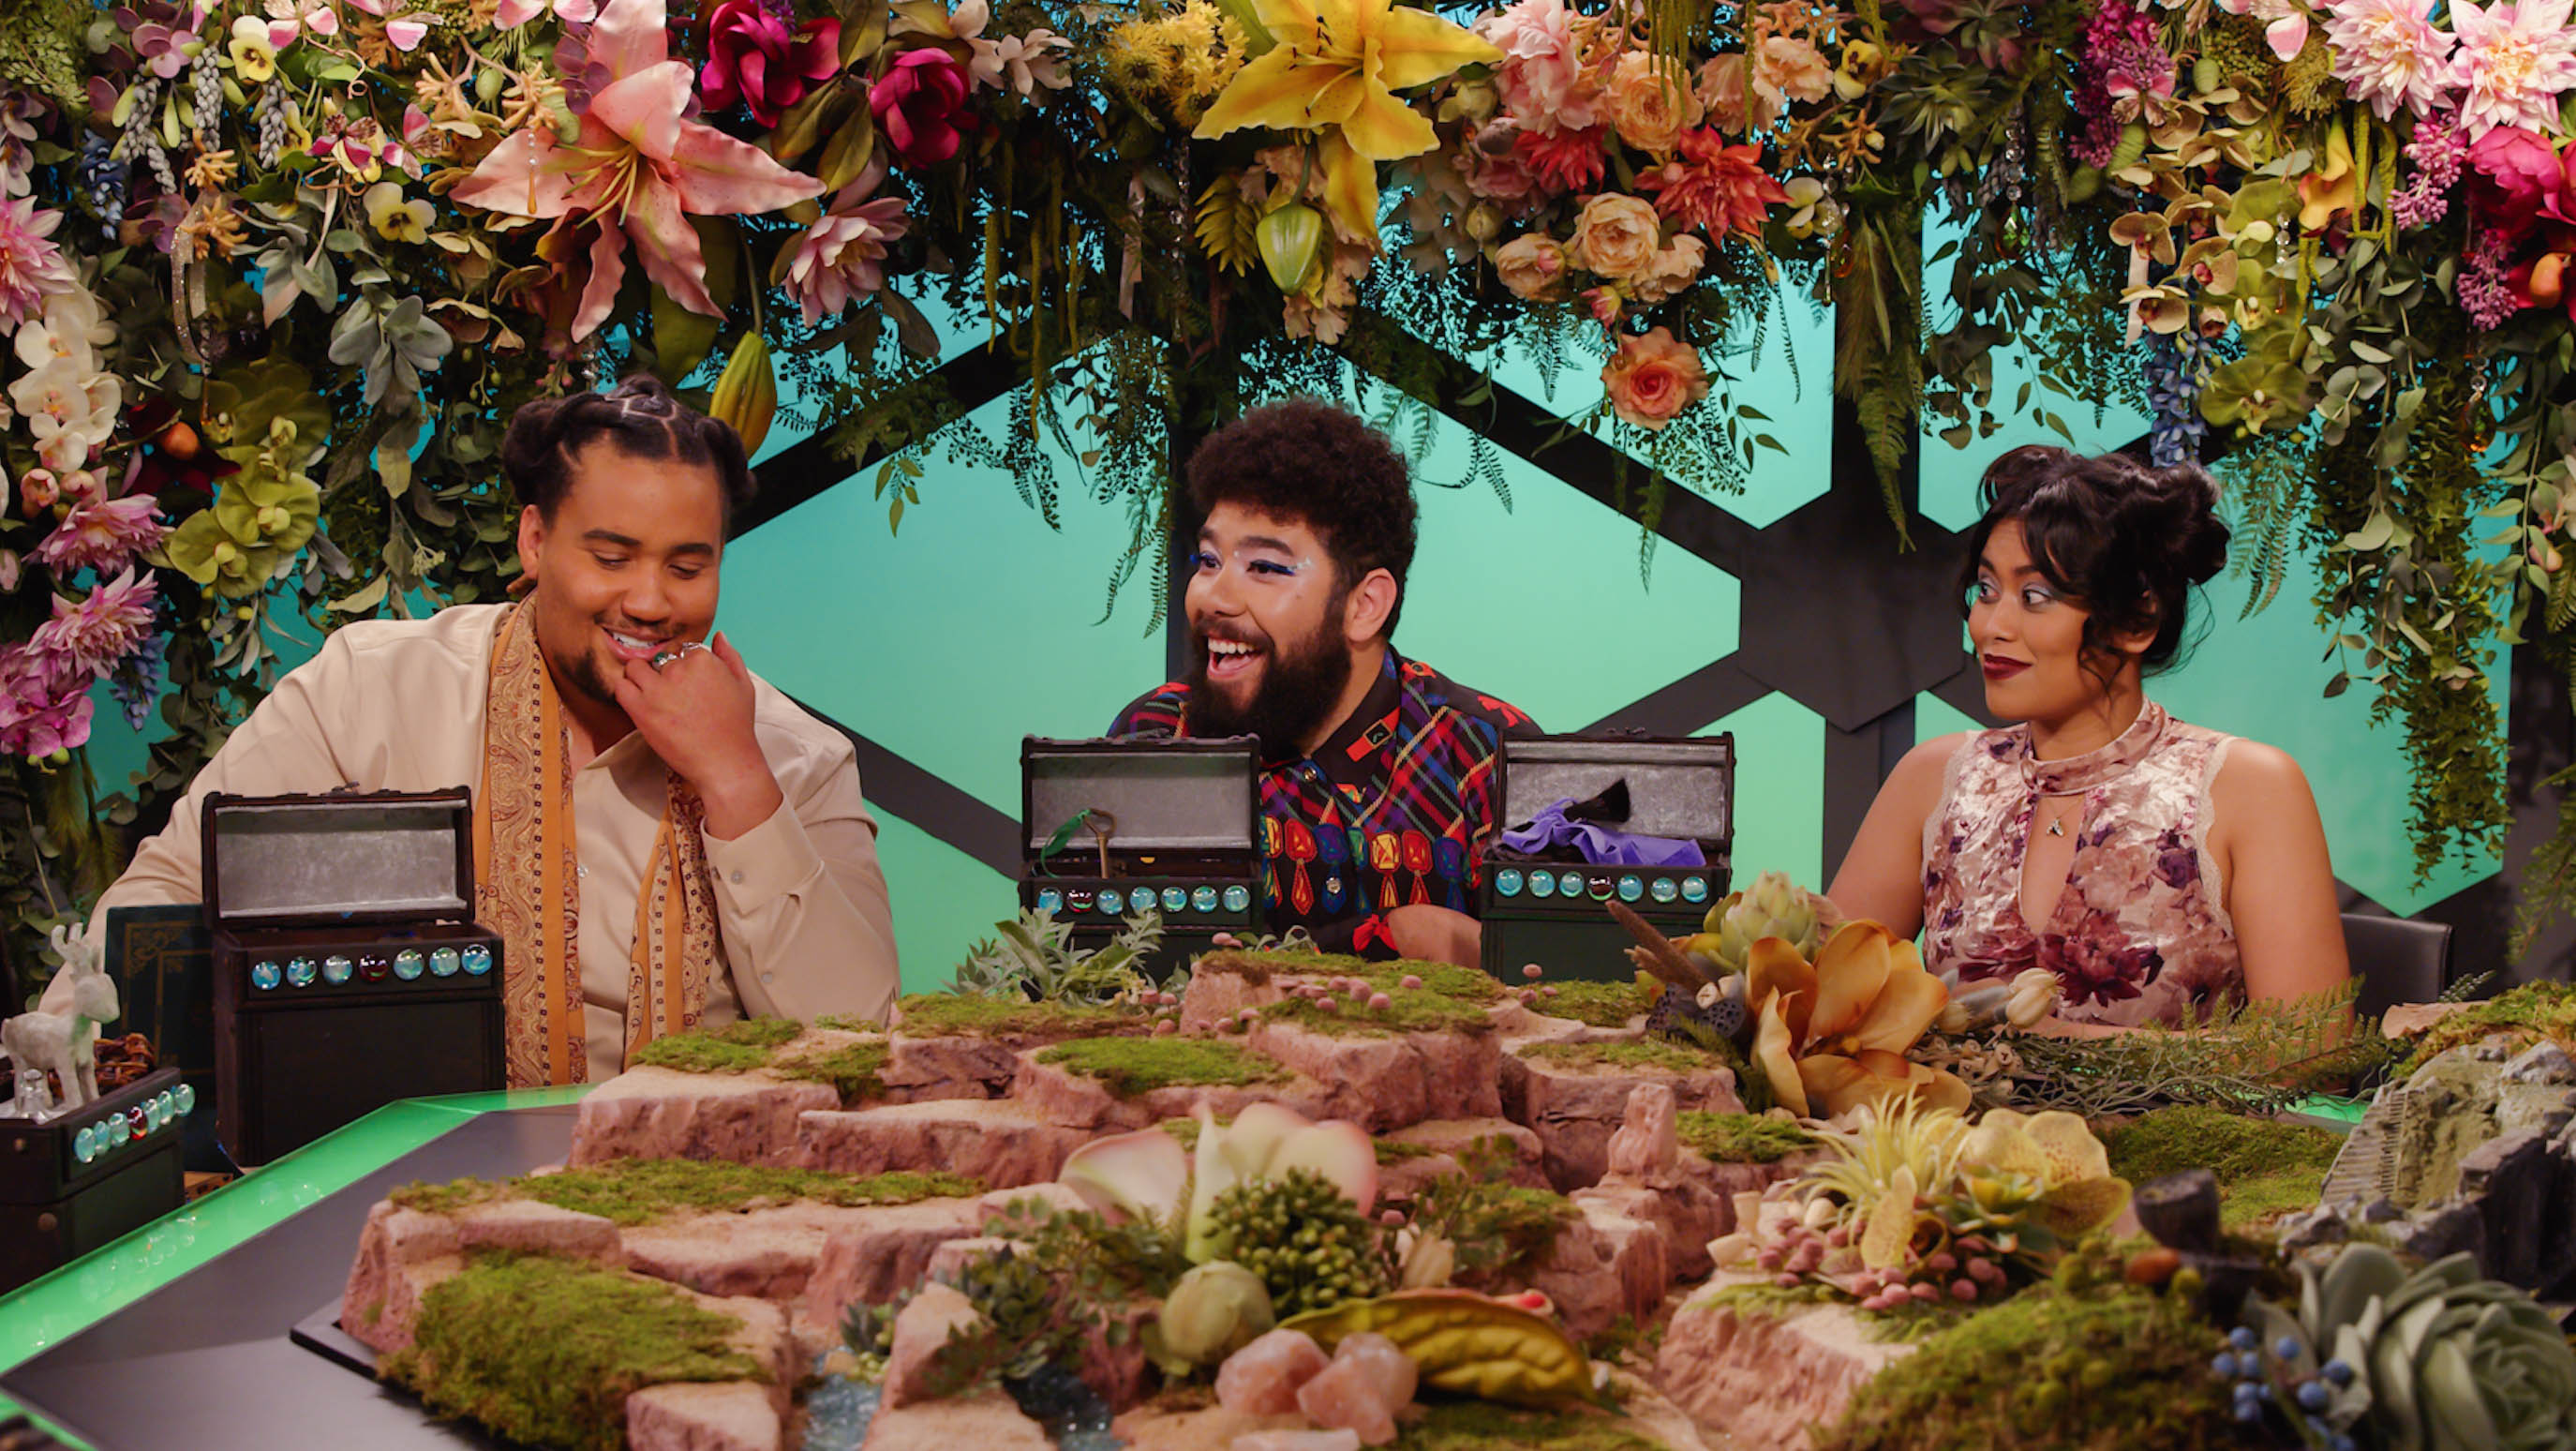 Three players at an elaborate board game table, covered in moss, flowers, and rock formations. Garlands hang above their heads.